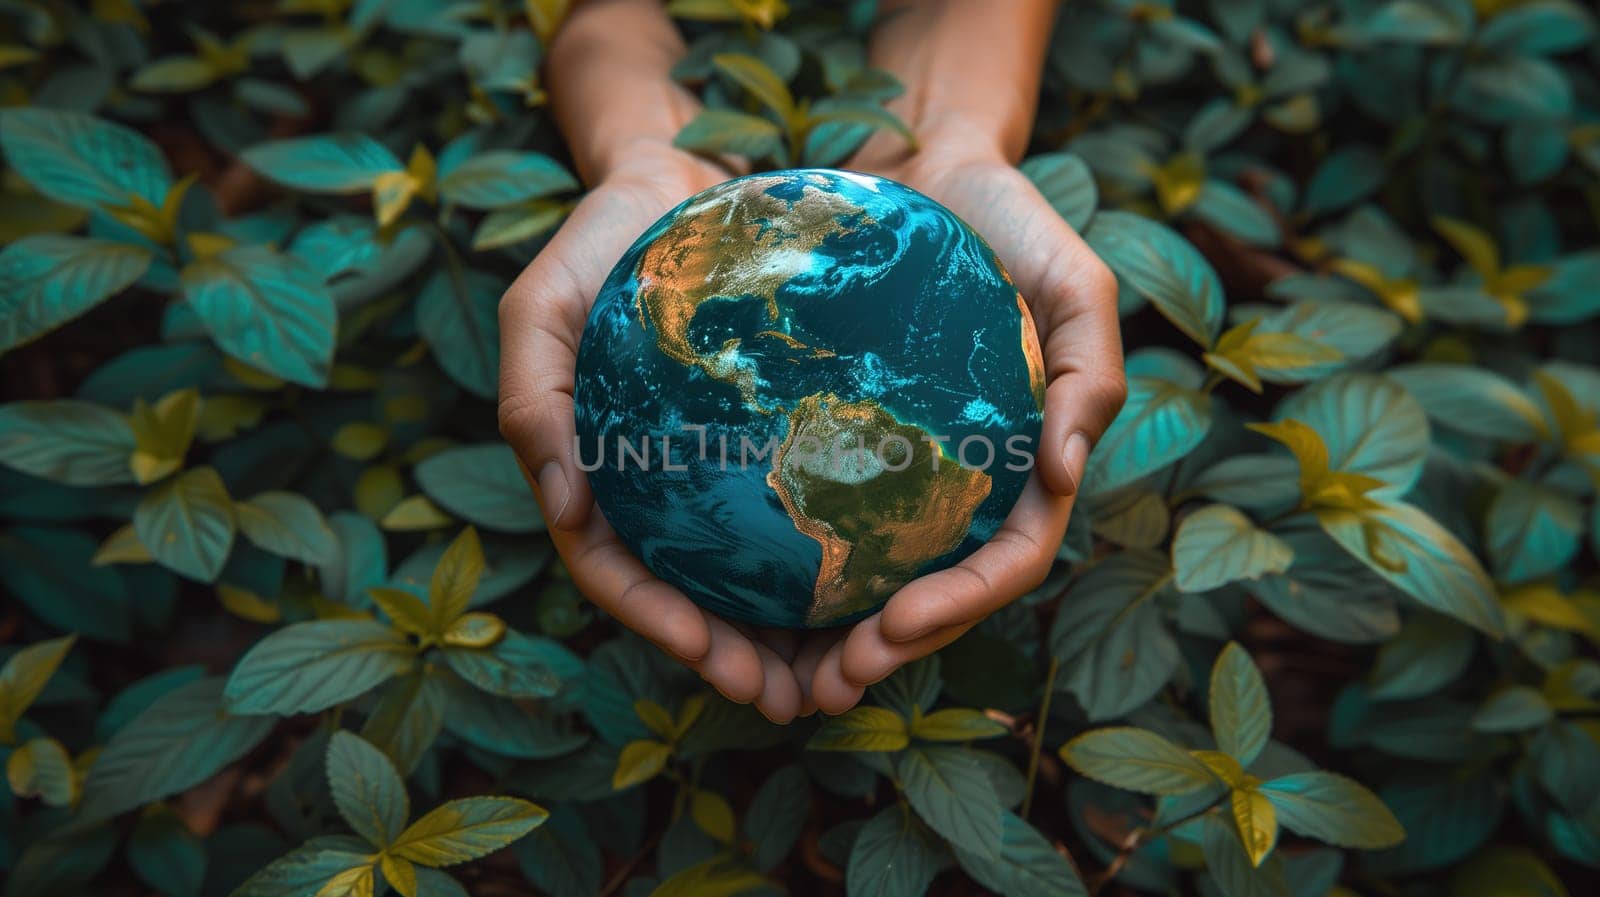 A person is holding a small model of the Earth in their hands. The Earth is shown from space, with continents and oceans visible on its surface. The persons hands cradle the planet carefully, symbolizing care for the environment.